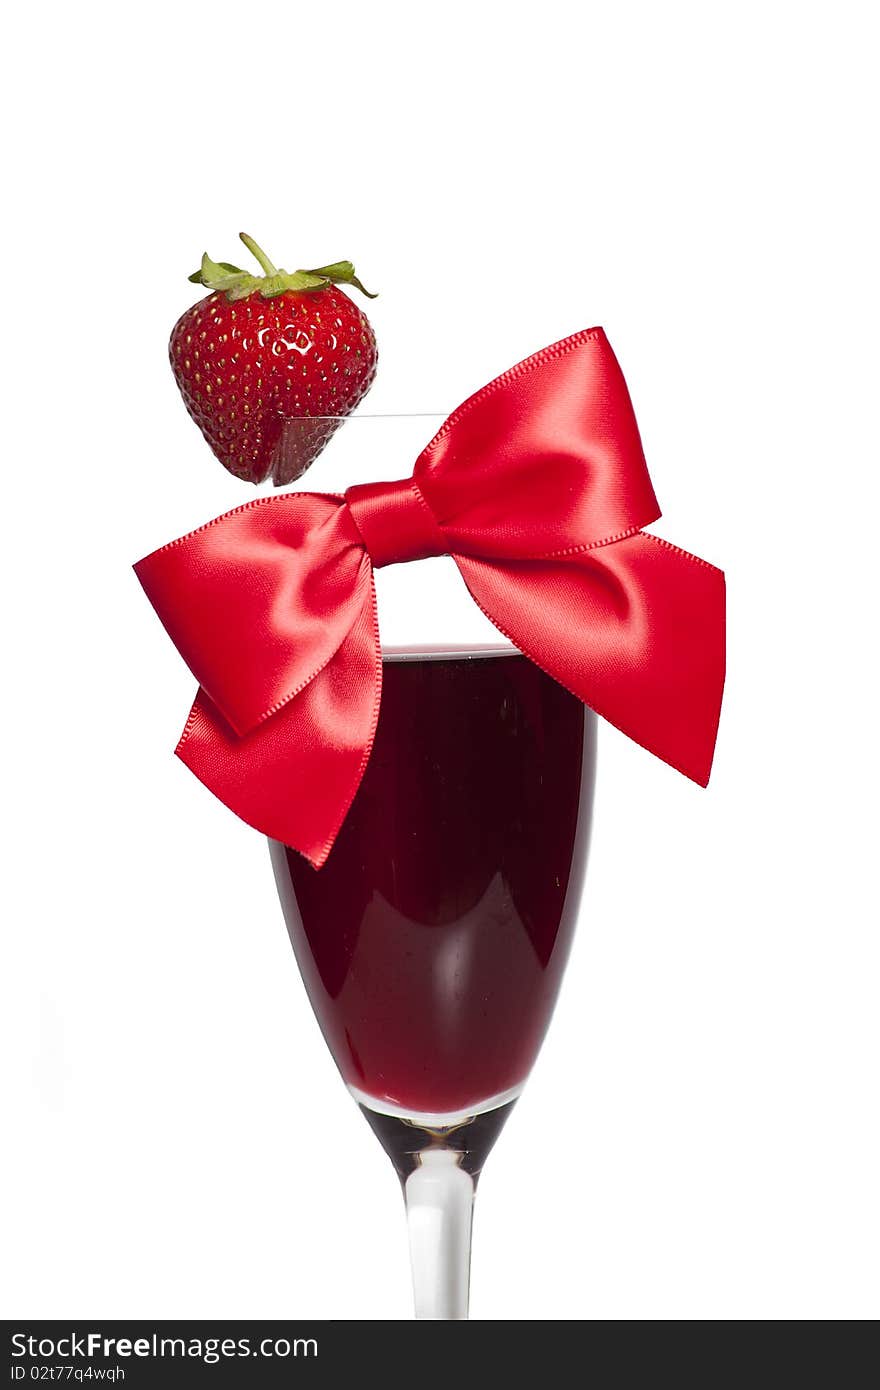 Strawberry and red bow as decoration on the glass of alcohol. Strawberry and red bow as decoration on the glass of alcohol